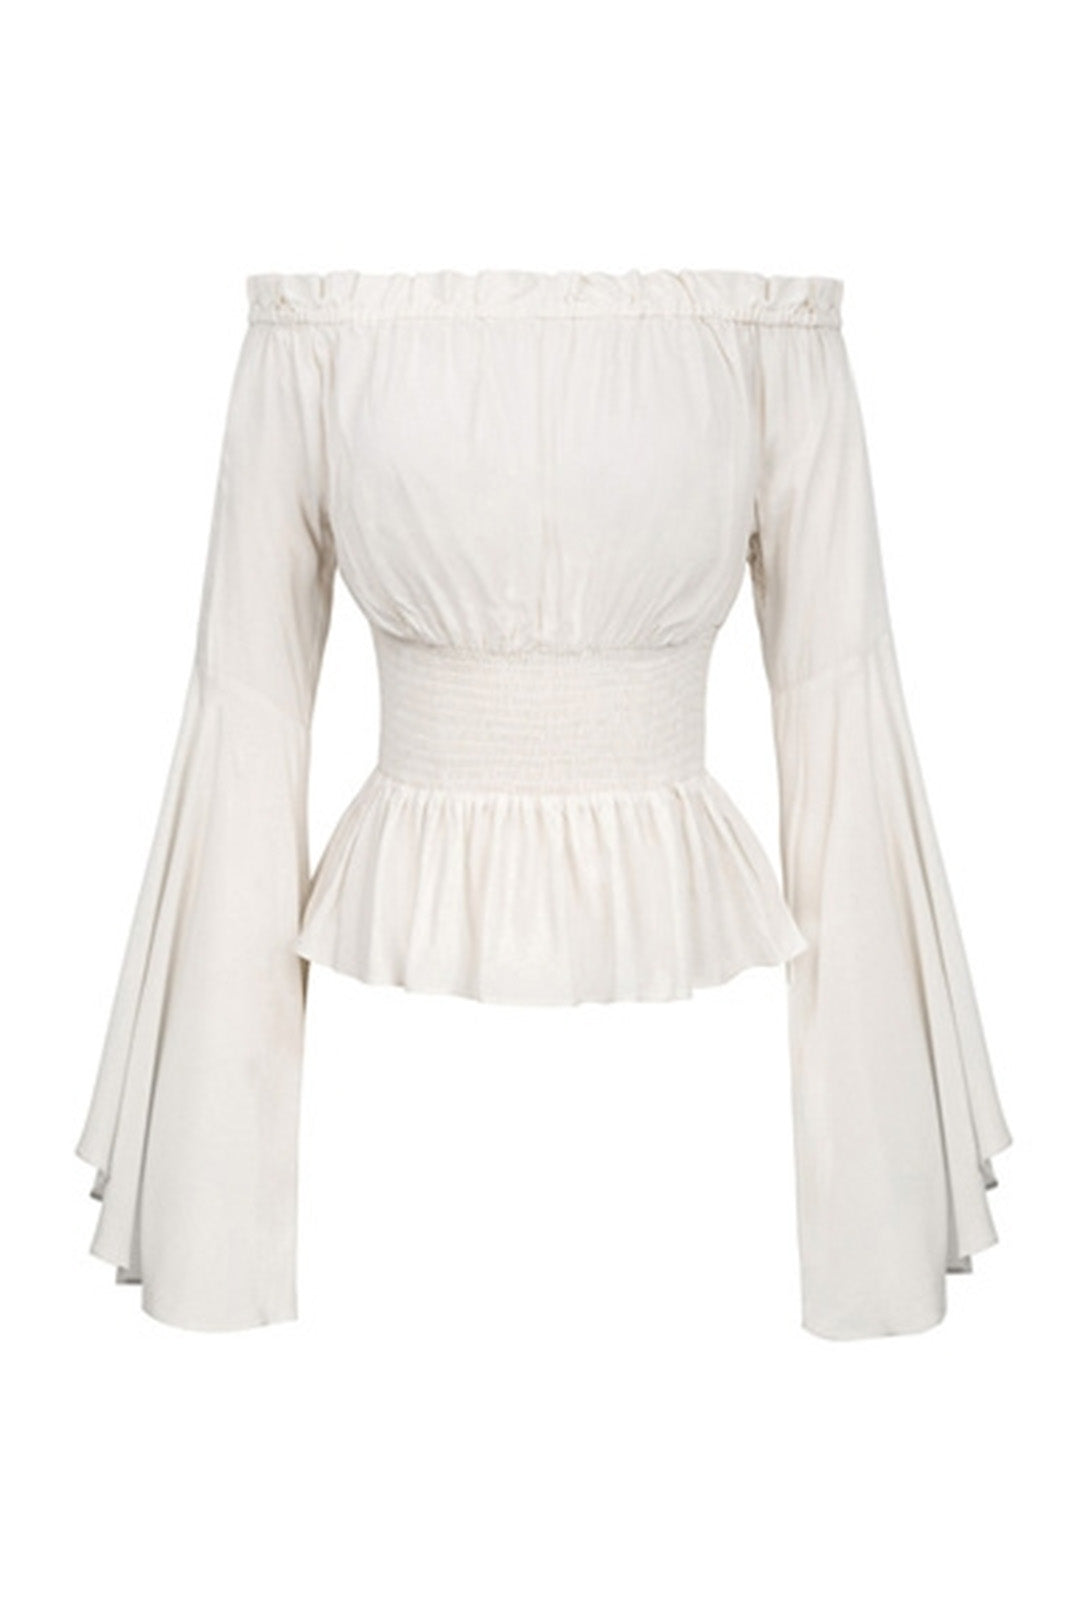 White Bell Sleeve Peasant Blouse